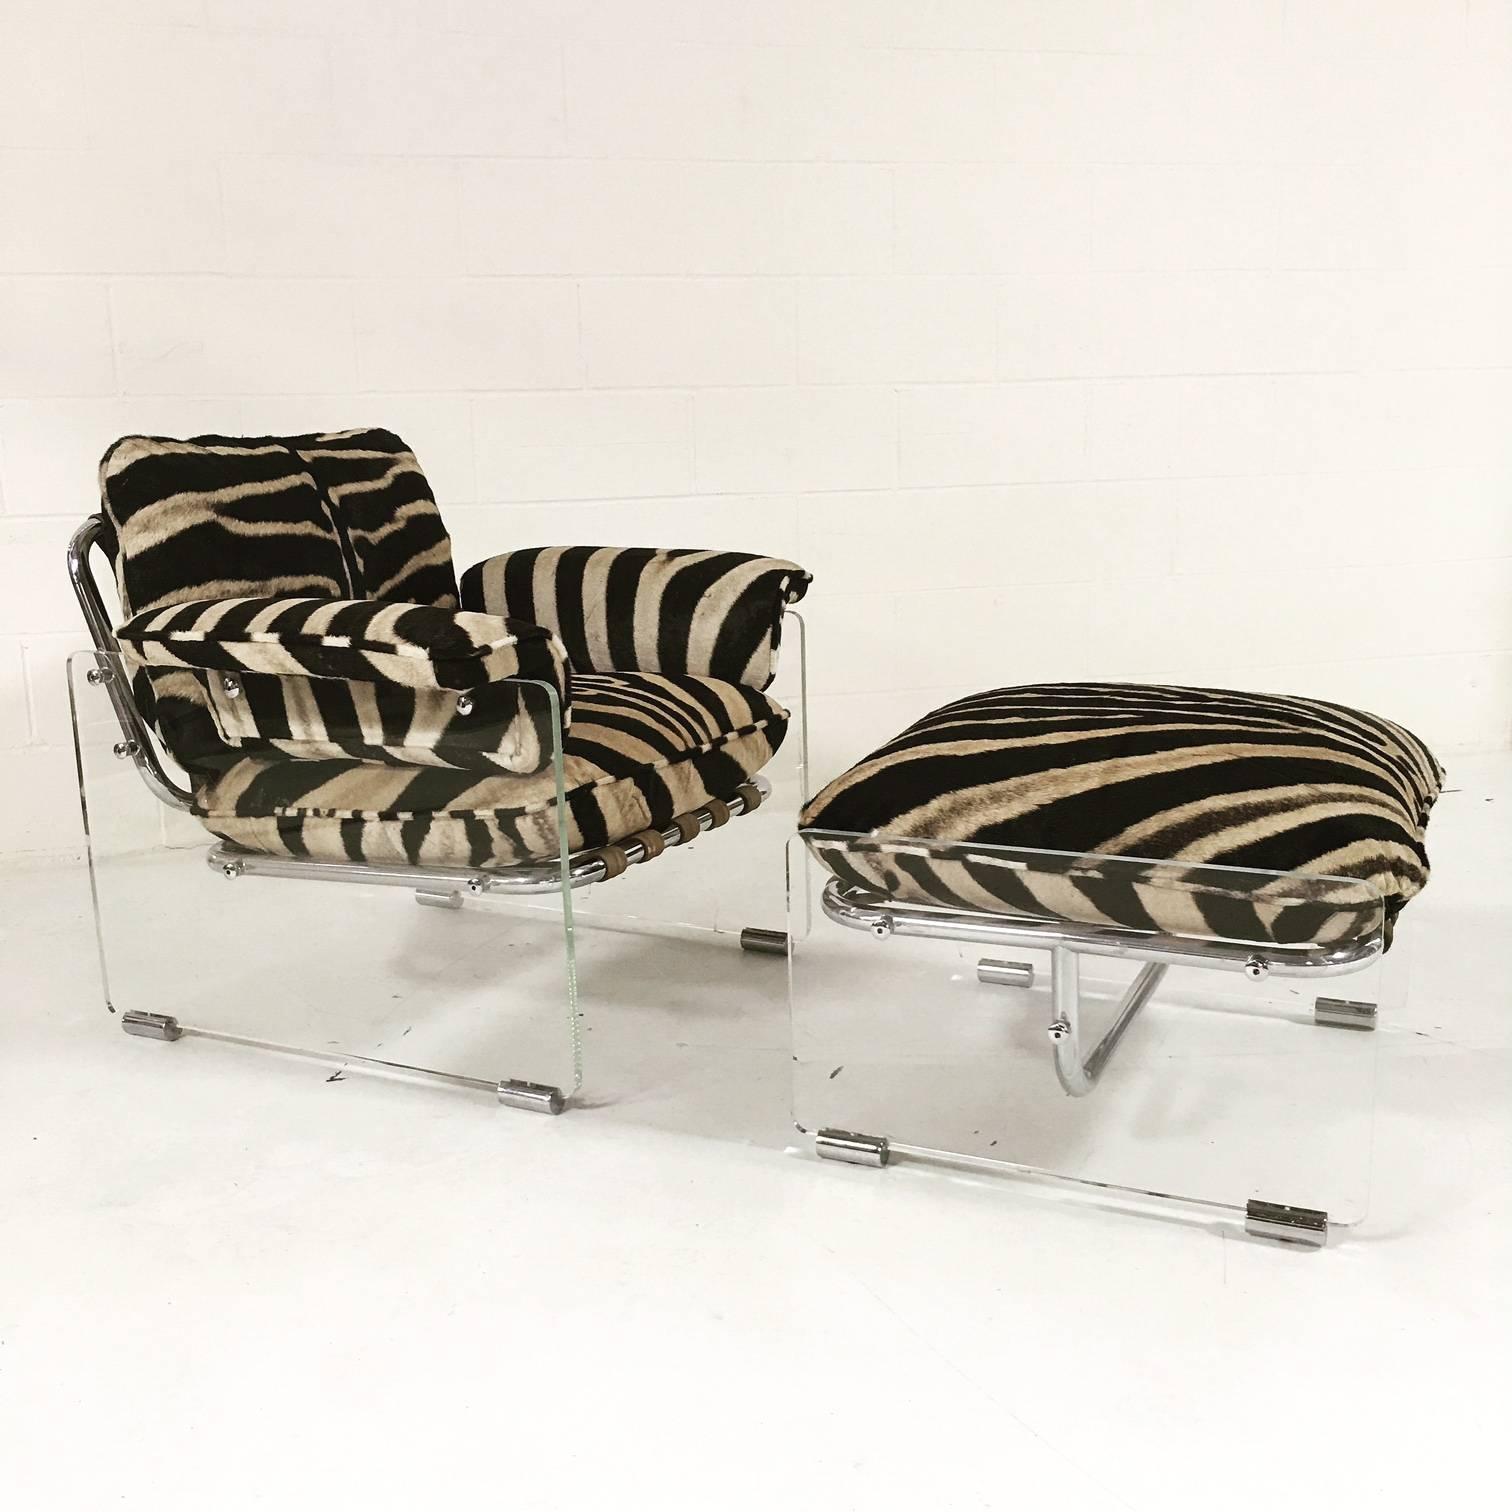 This amazing one of a kind 1970s Pace collection lounge chair and ottoman features thick Lucite panels with chrome details. Suede and wool straps wrap the tubular chrome frame to support the cushions. The loose cushions have been masterfully